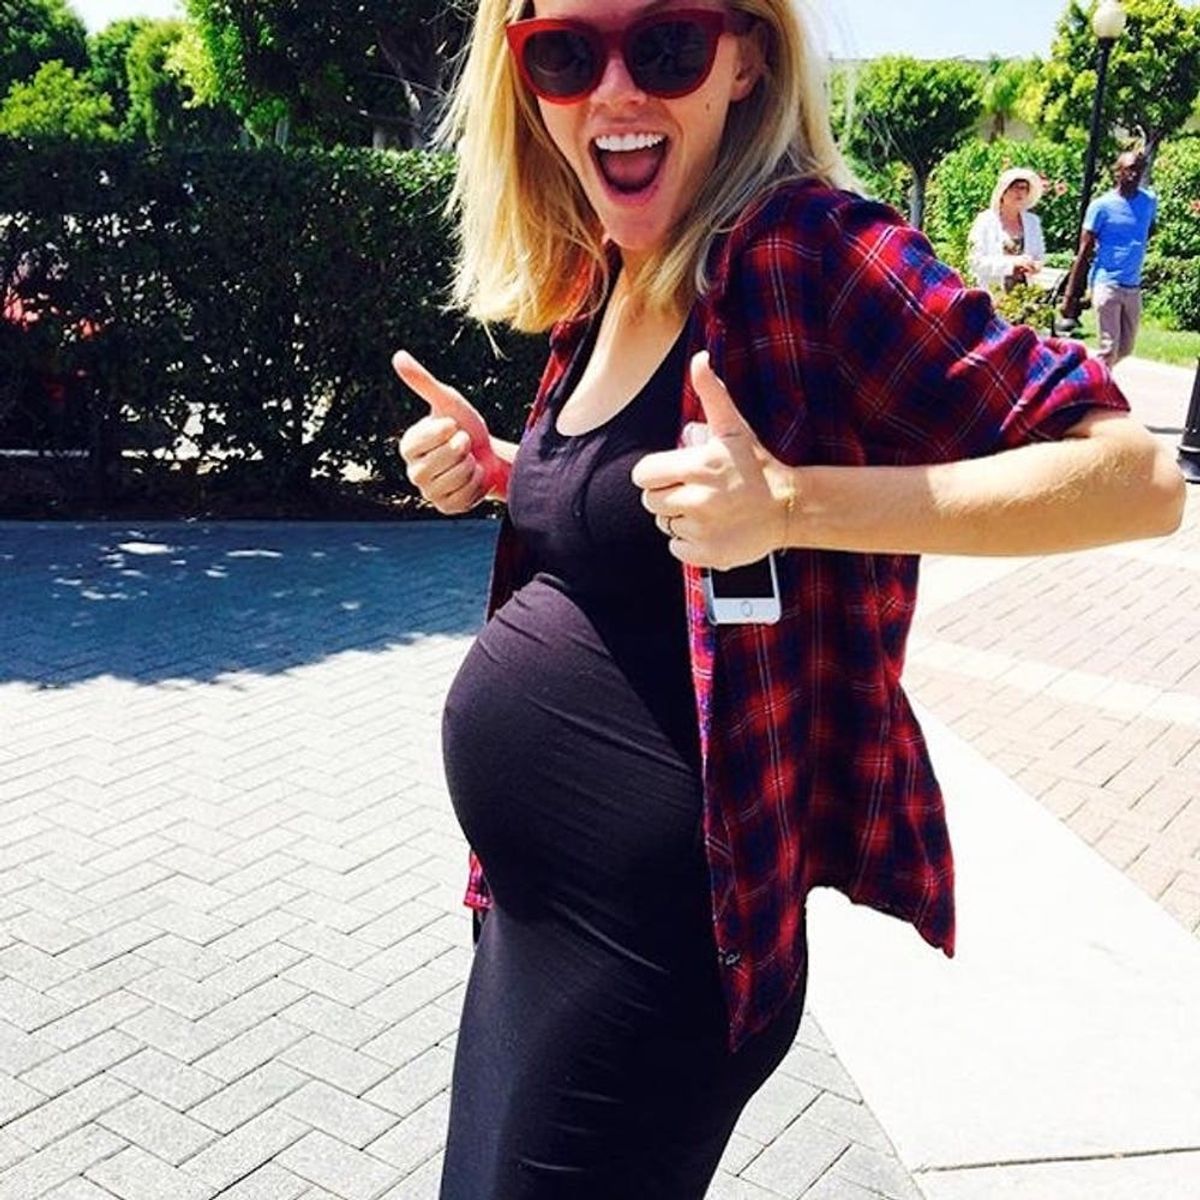 Brooklyn Decker Will Make You Want to Do This When You Give Birth